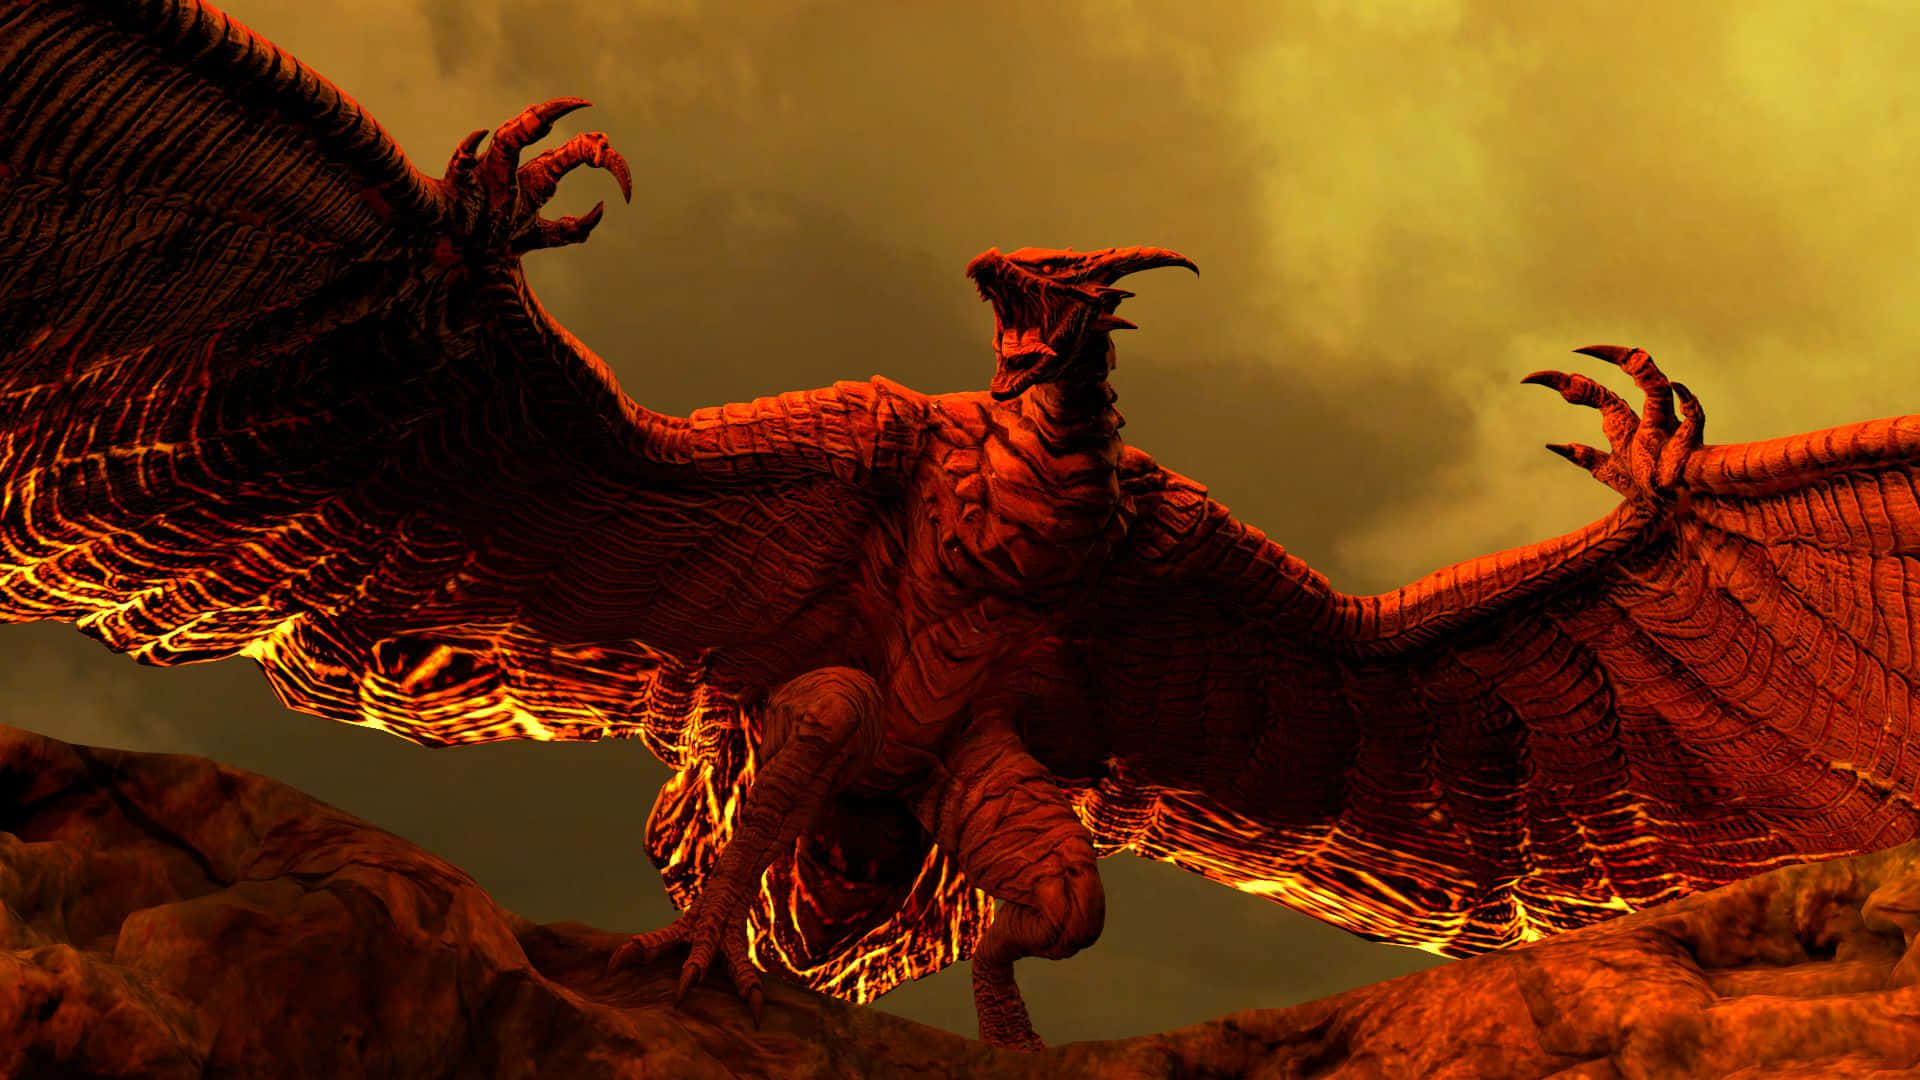 Rodan Soars Over The Sky With Its Remarkable Wingspan